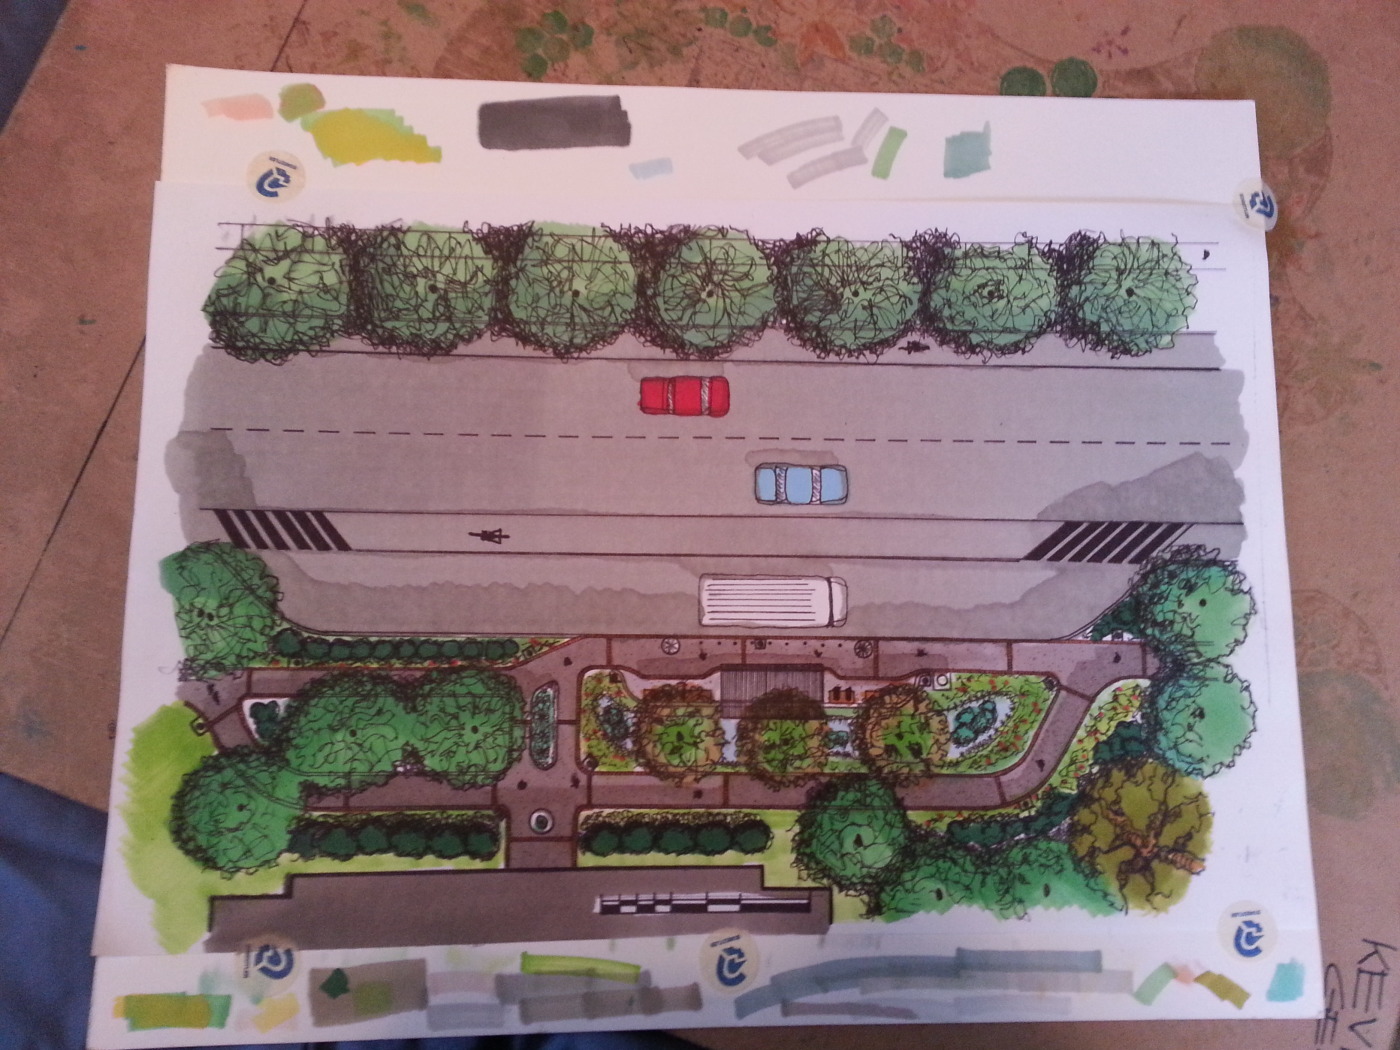 Hand drawn planview of proposed bus stop